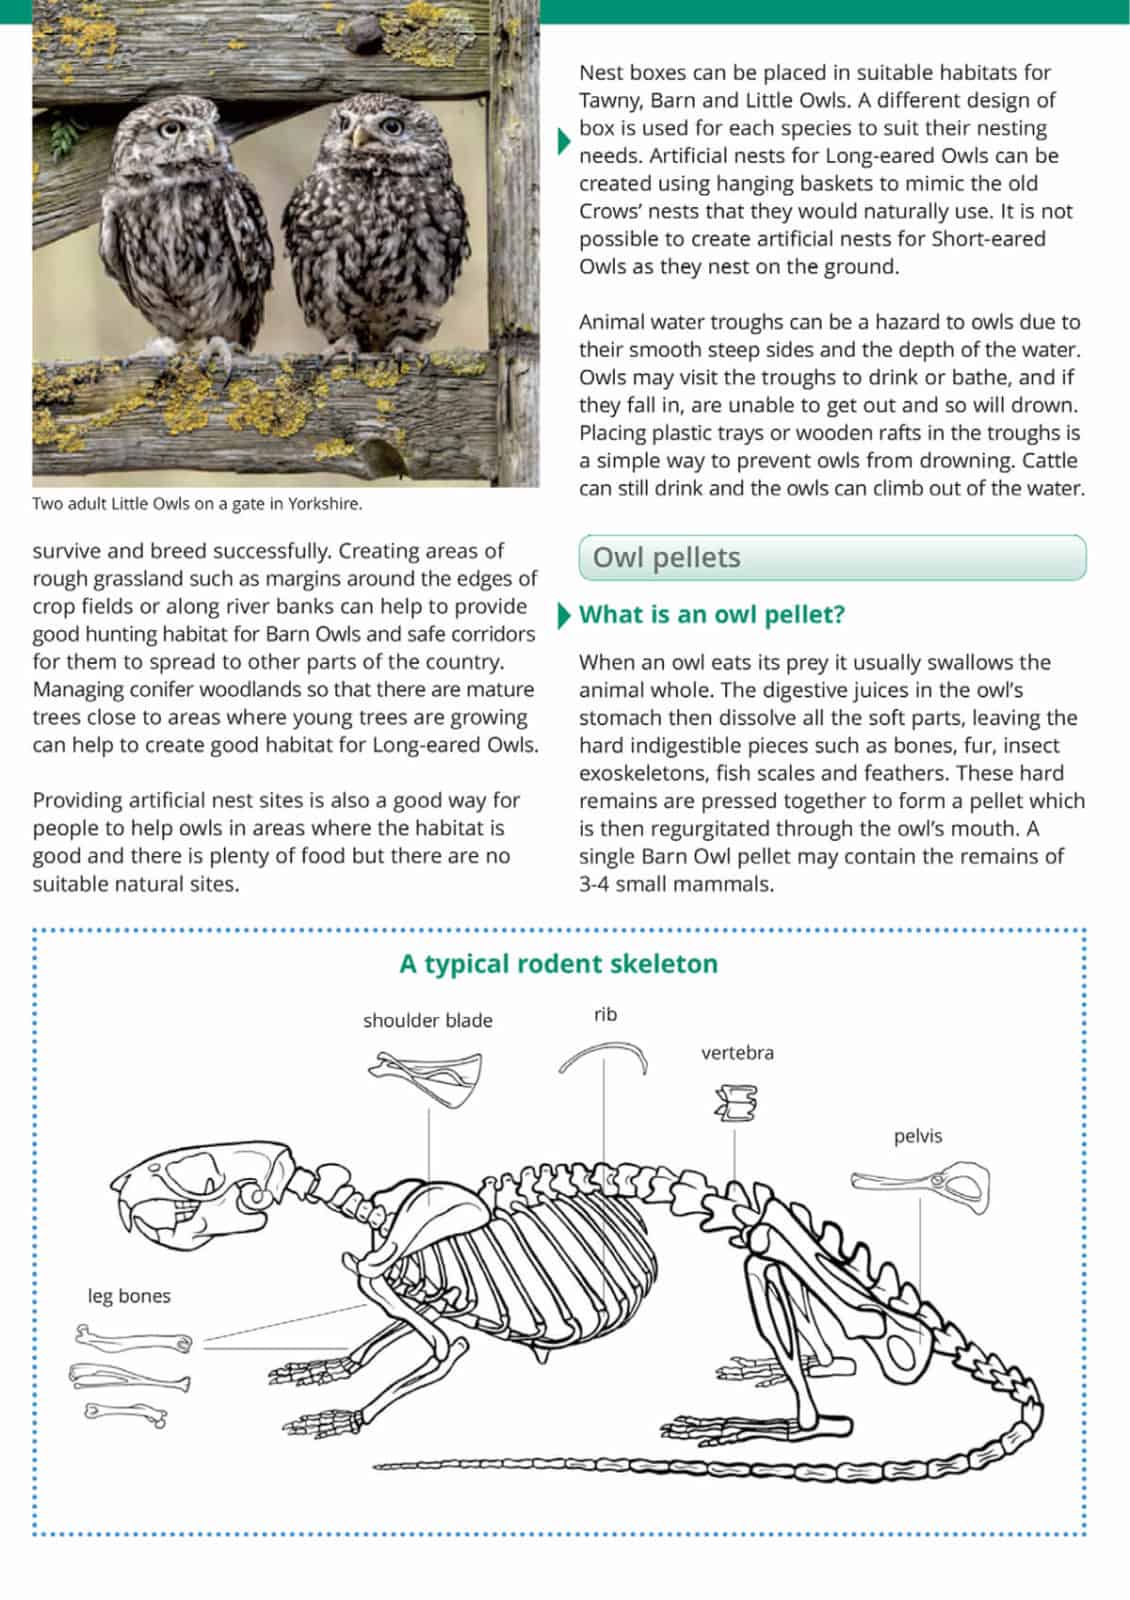 Owls and owl pellets guide